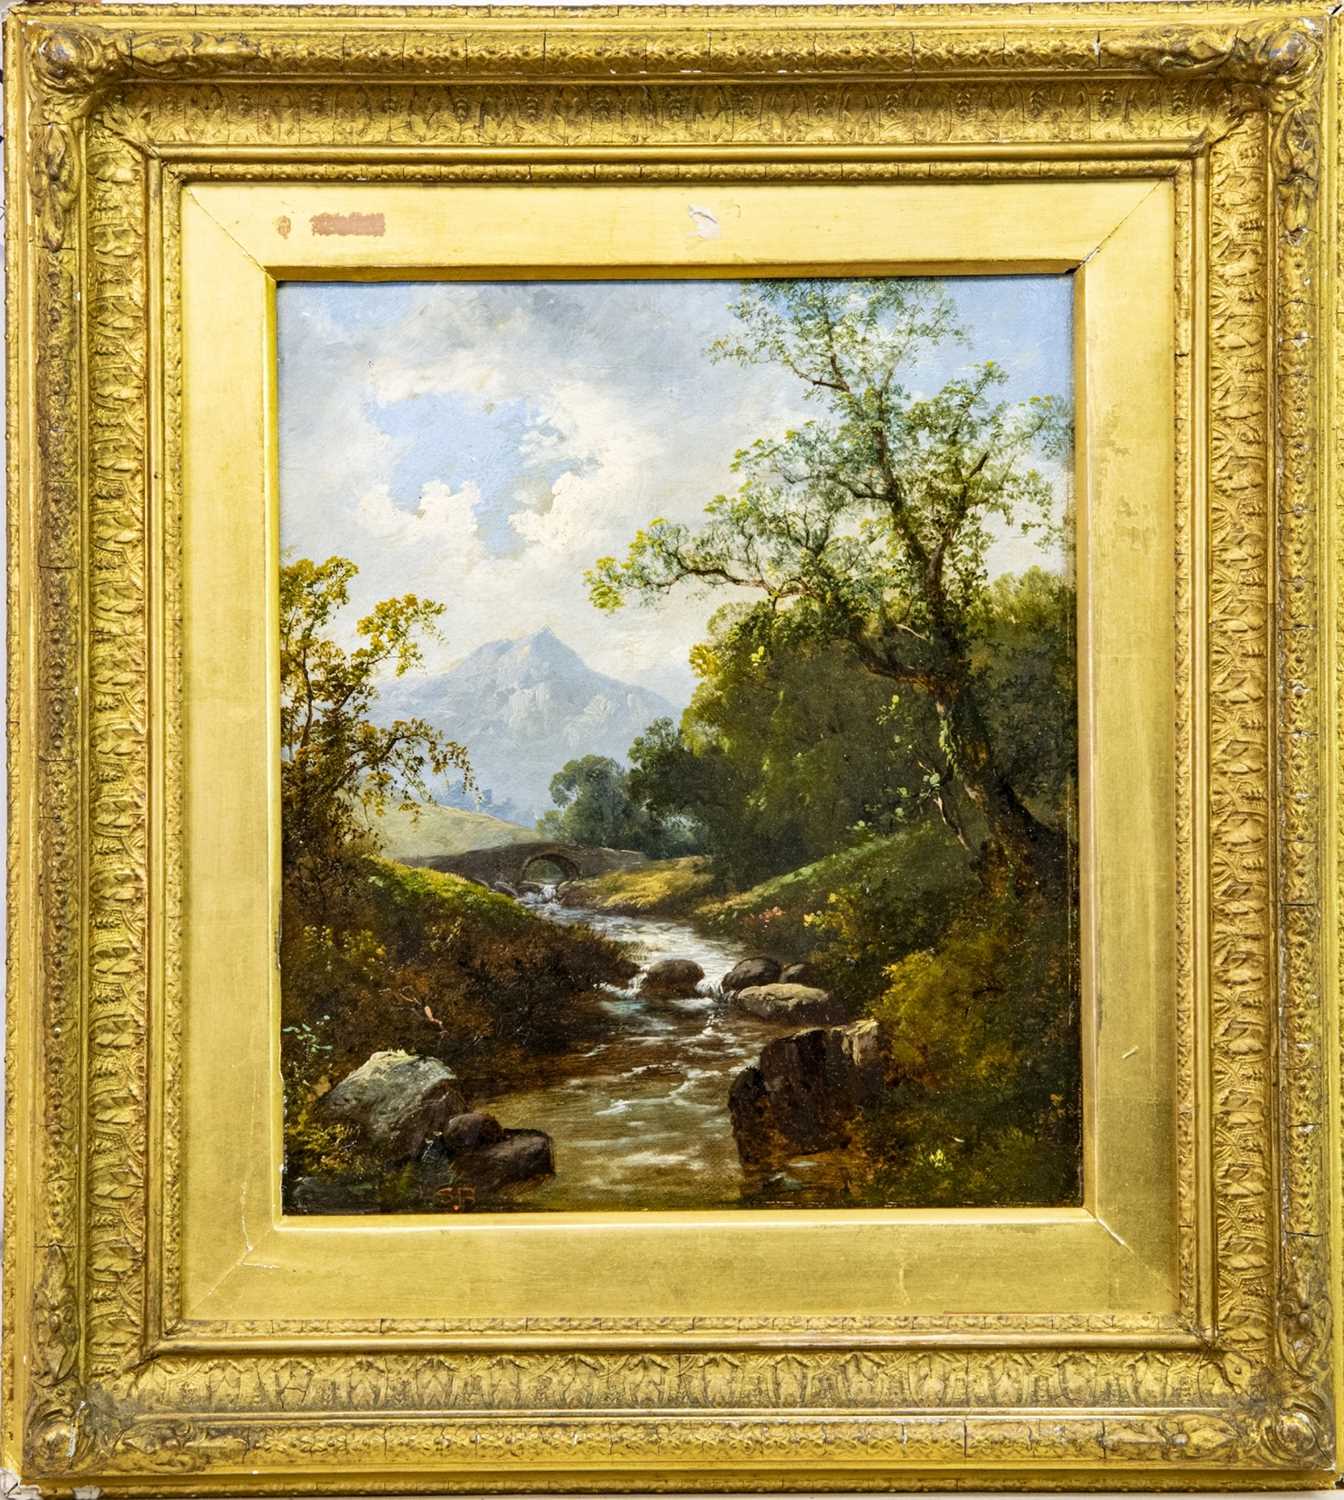 Lot 14 - STREAM IN A FOREST, AN OIL BY JAMES BURRELL SMITH